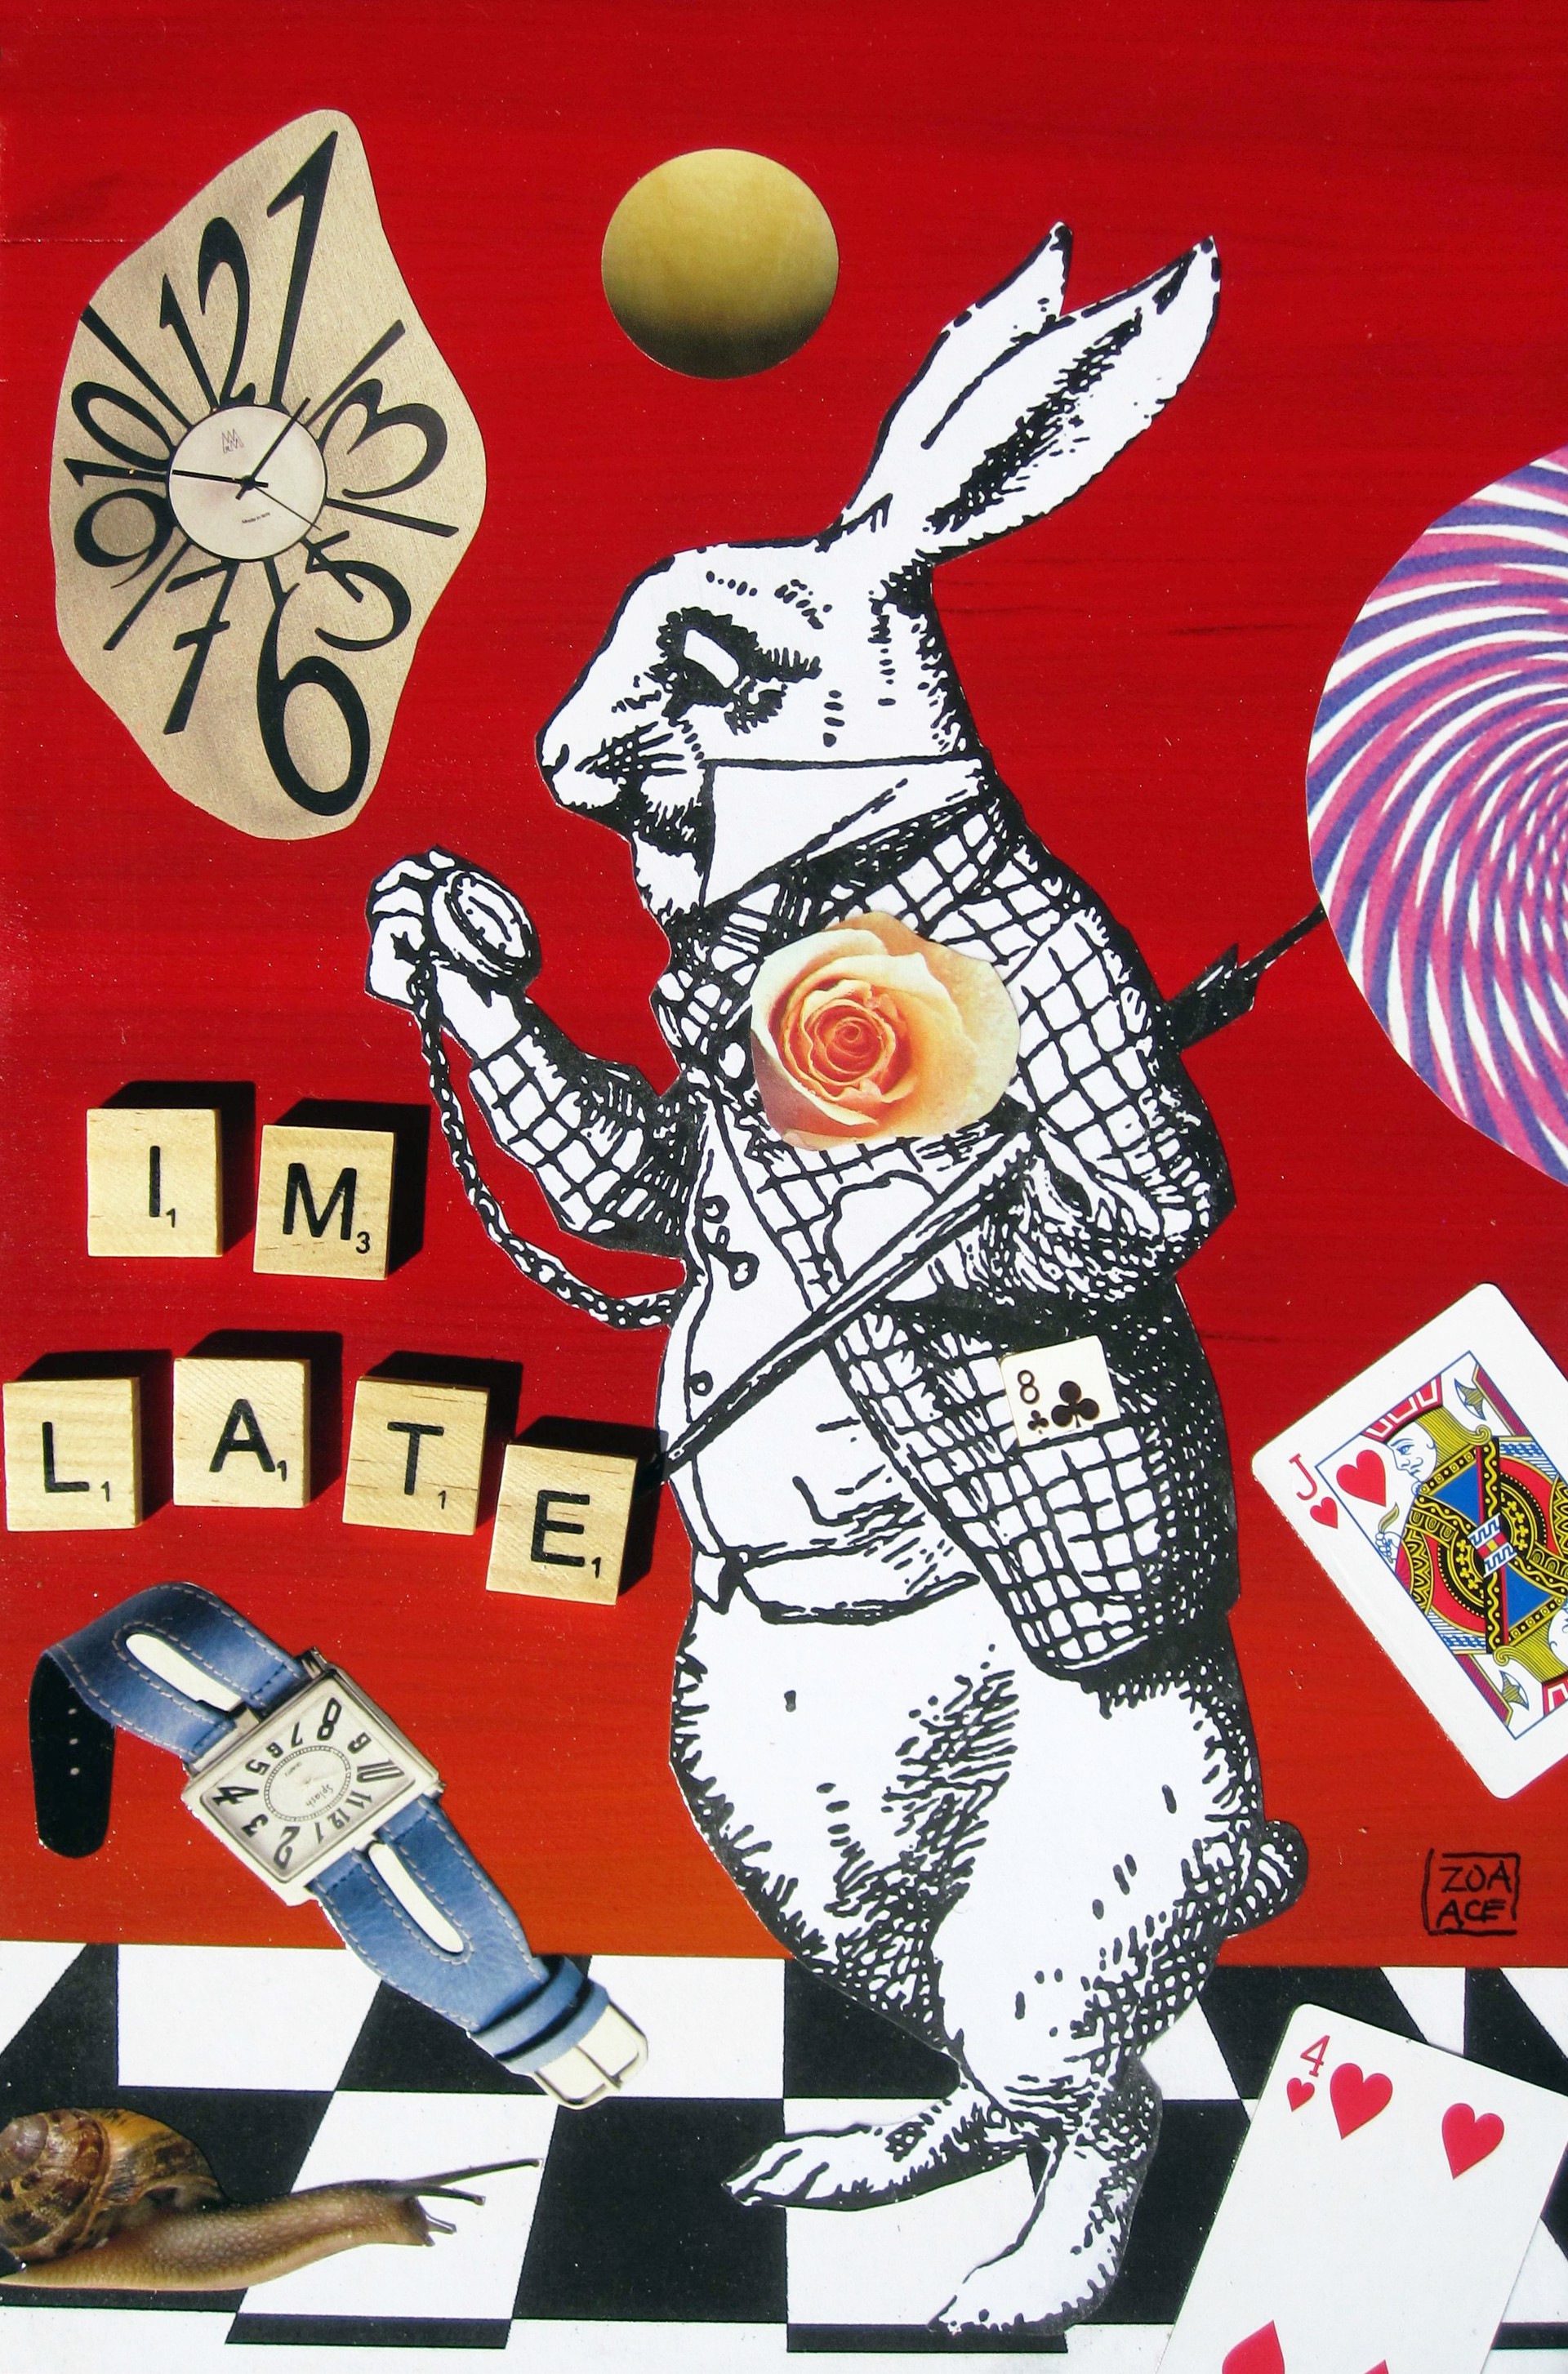 I'm Late by Zoa Ace